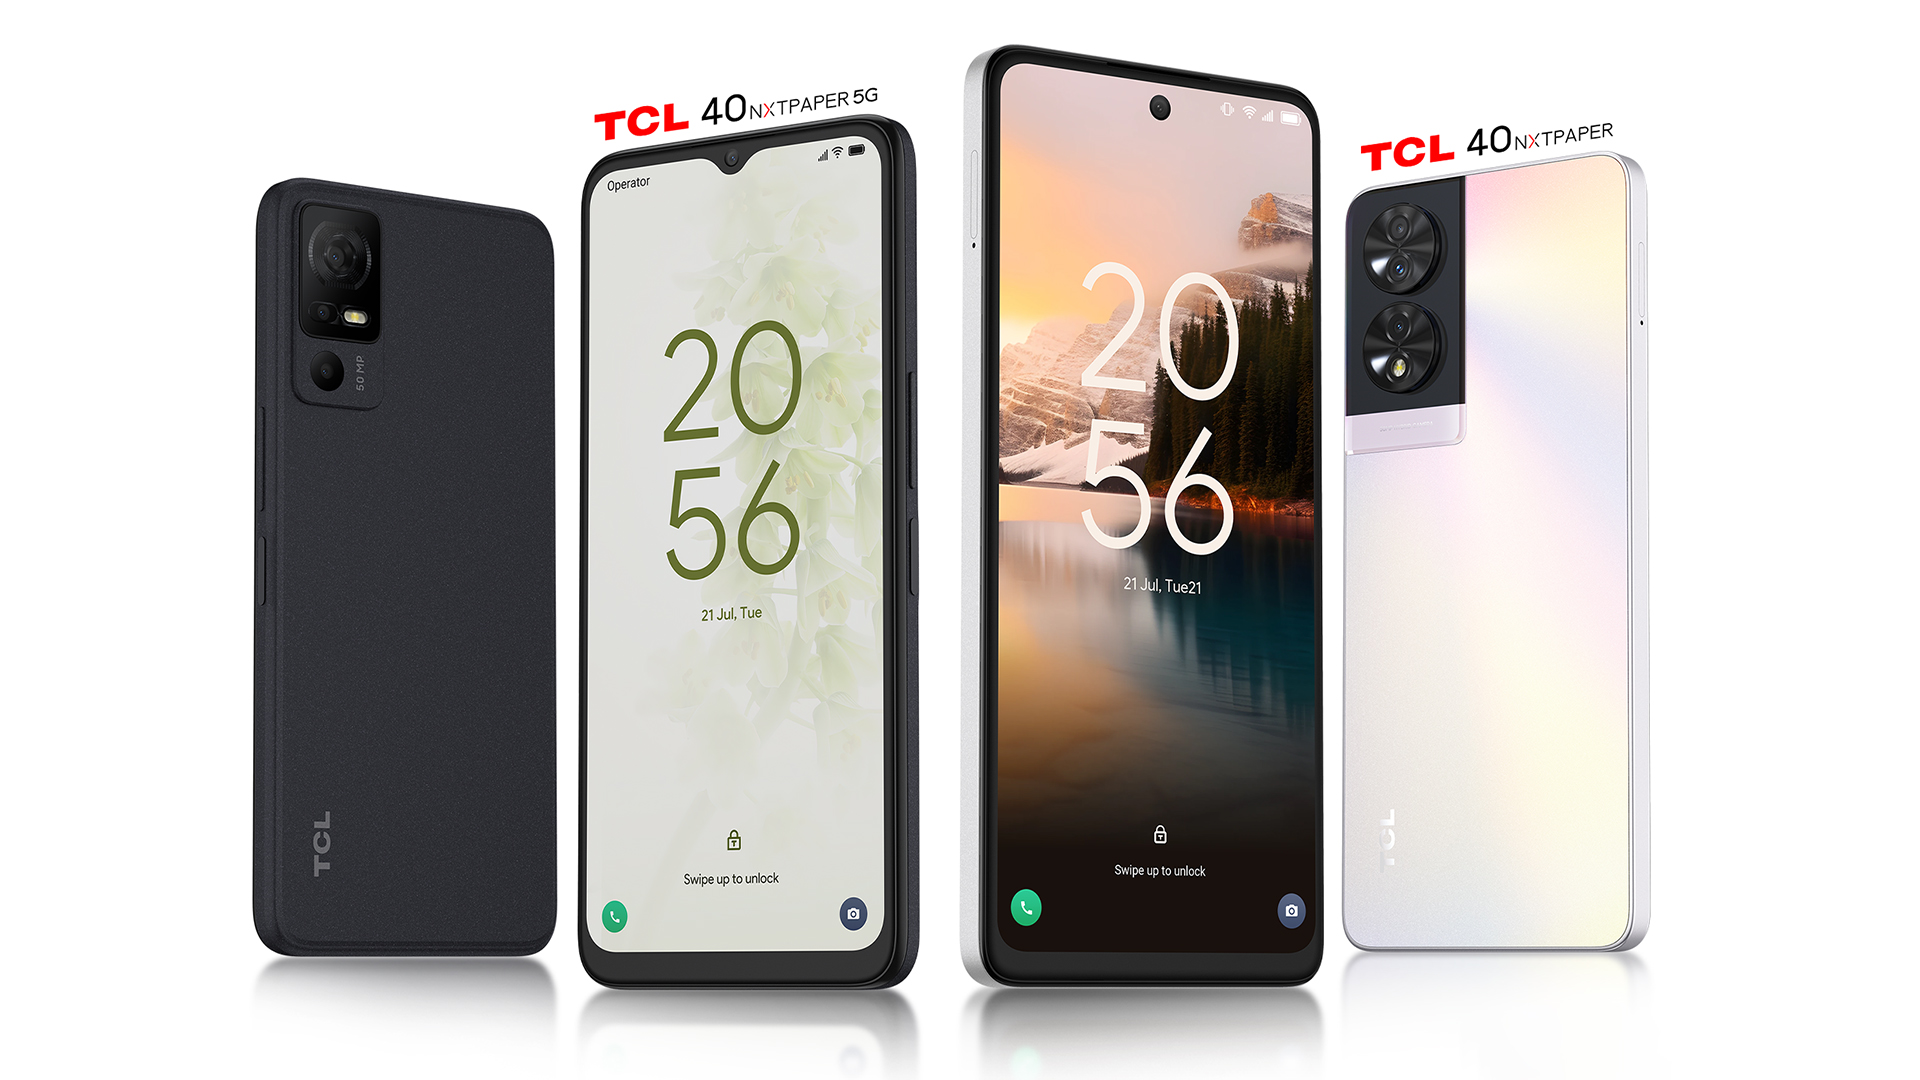 TCL 40 NXTPAPER 4G and 5G